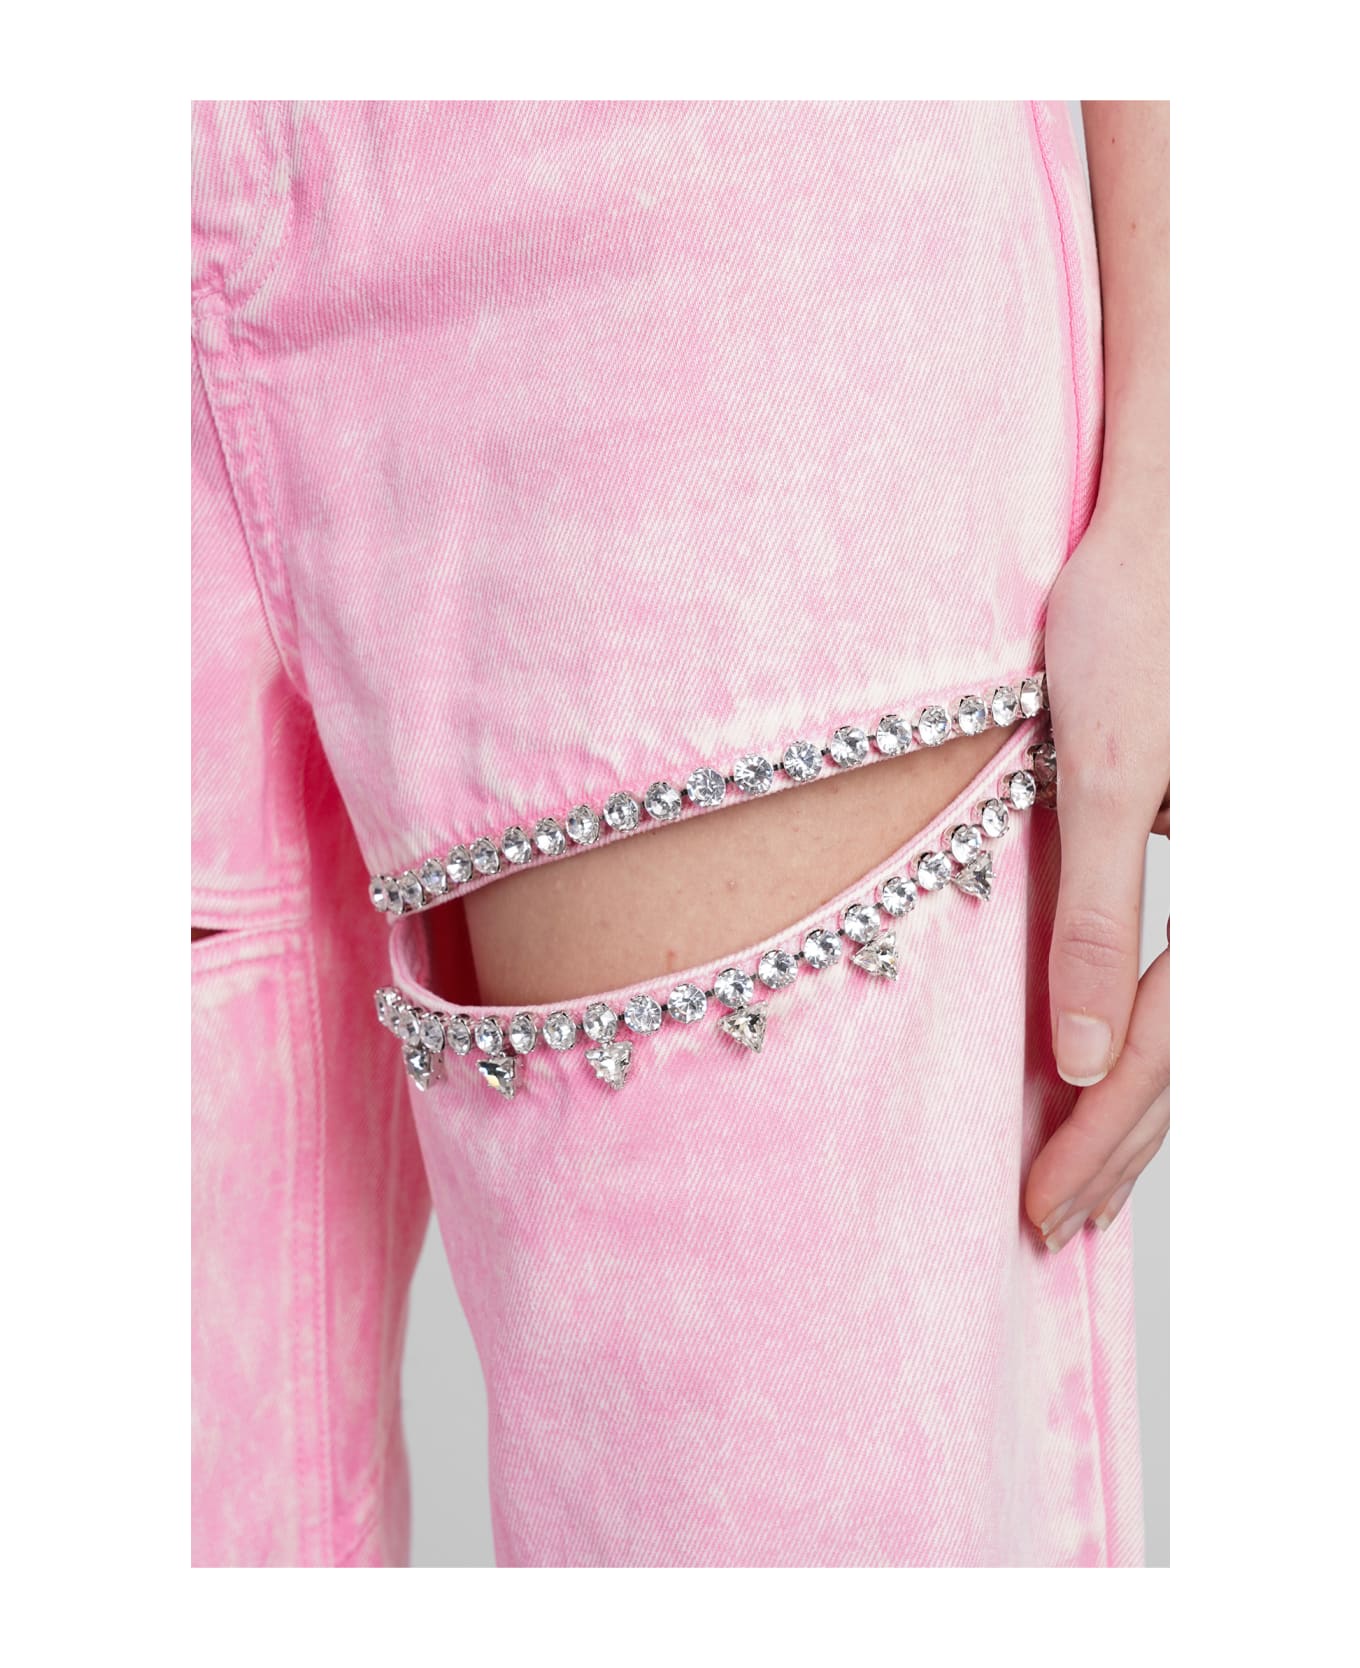 AREA Jeans In Rose-pink Cotton - rose-pink